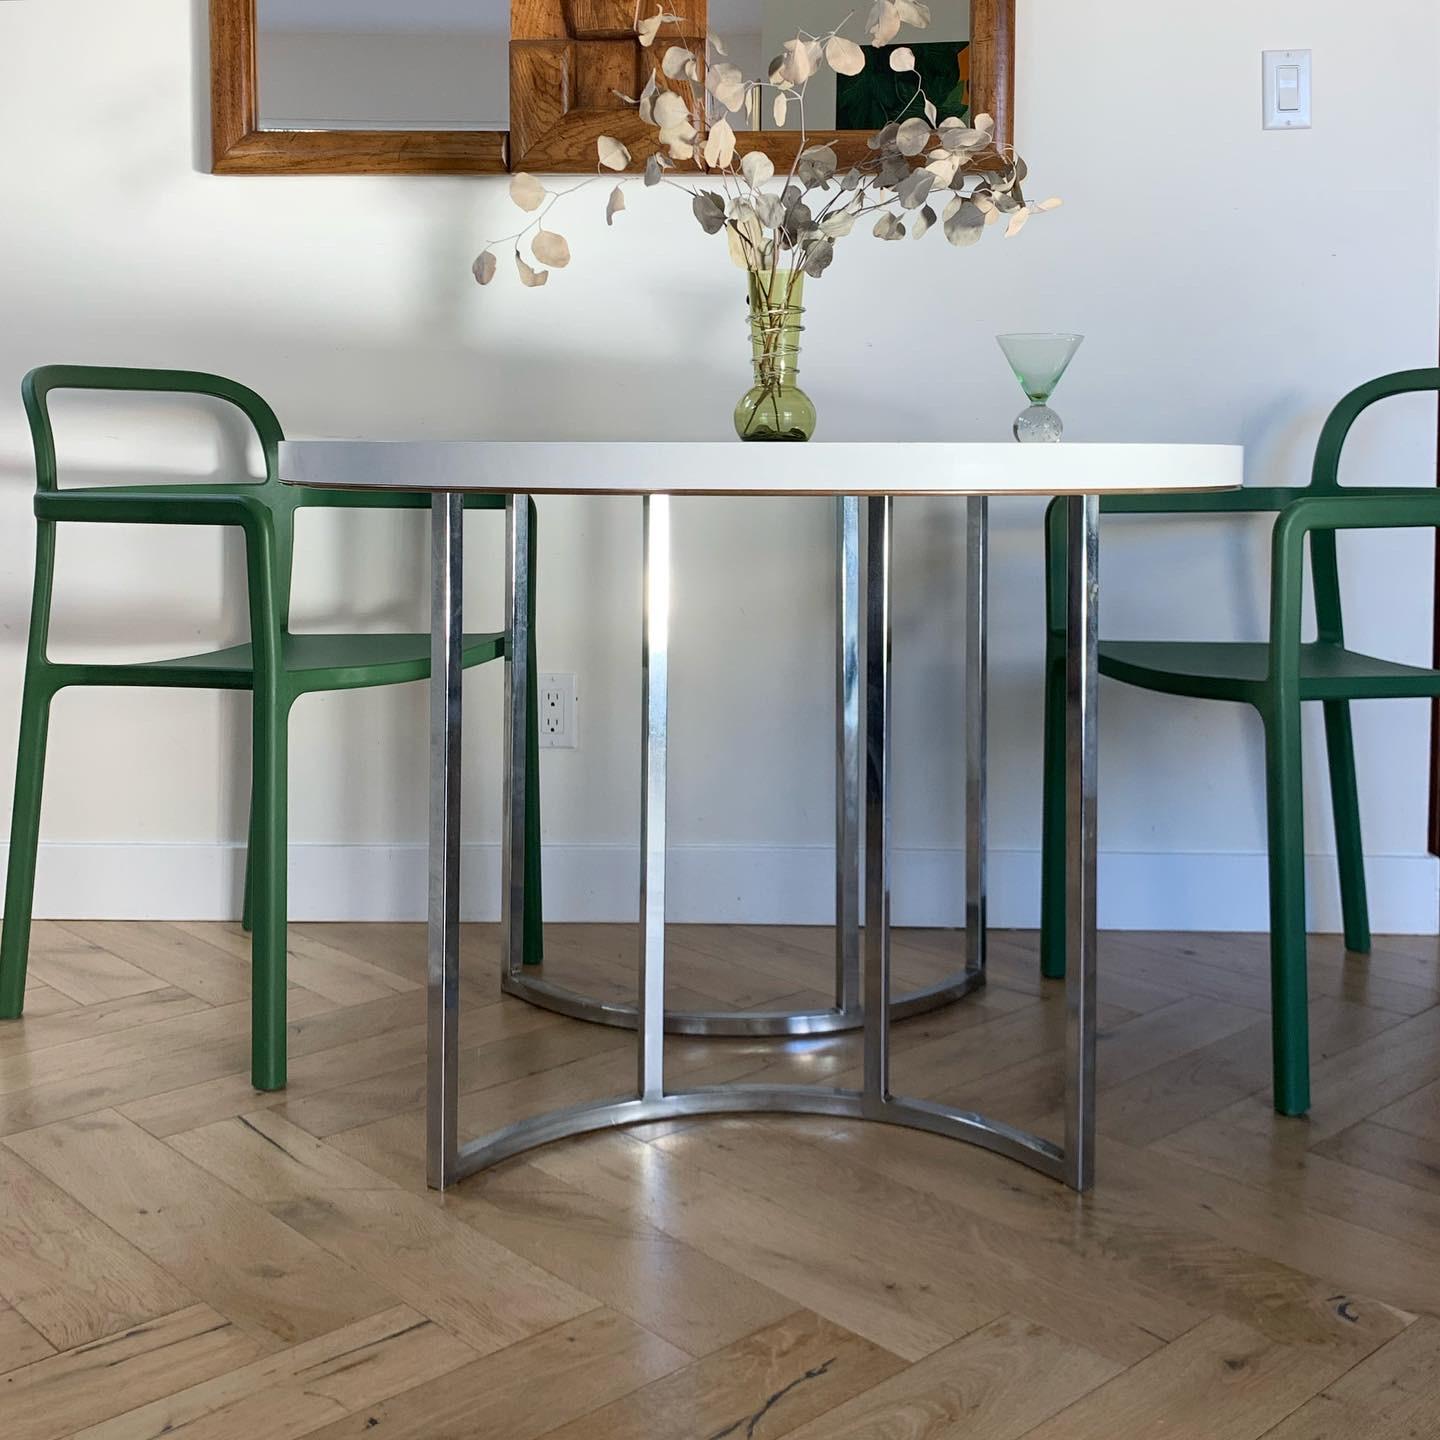 Early 1970s dinette bistro dining table with geometric chrome double pedestal base and laminate round top. Local pick up and delivery available.